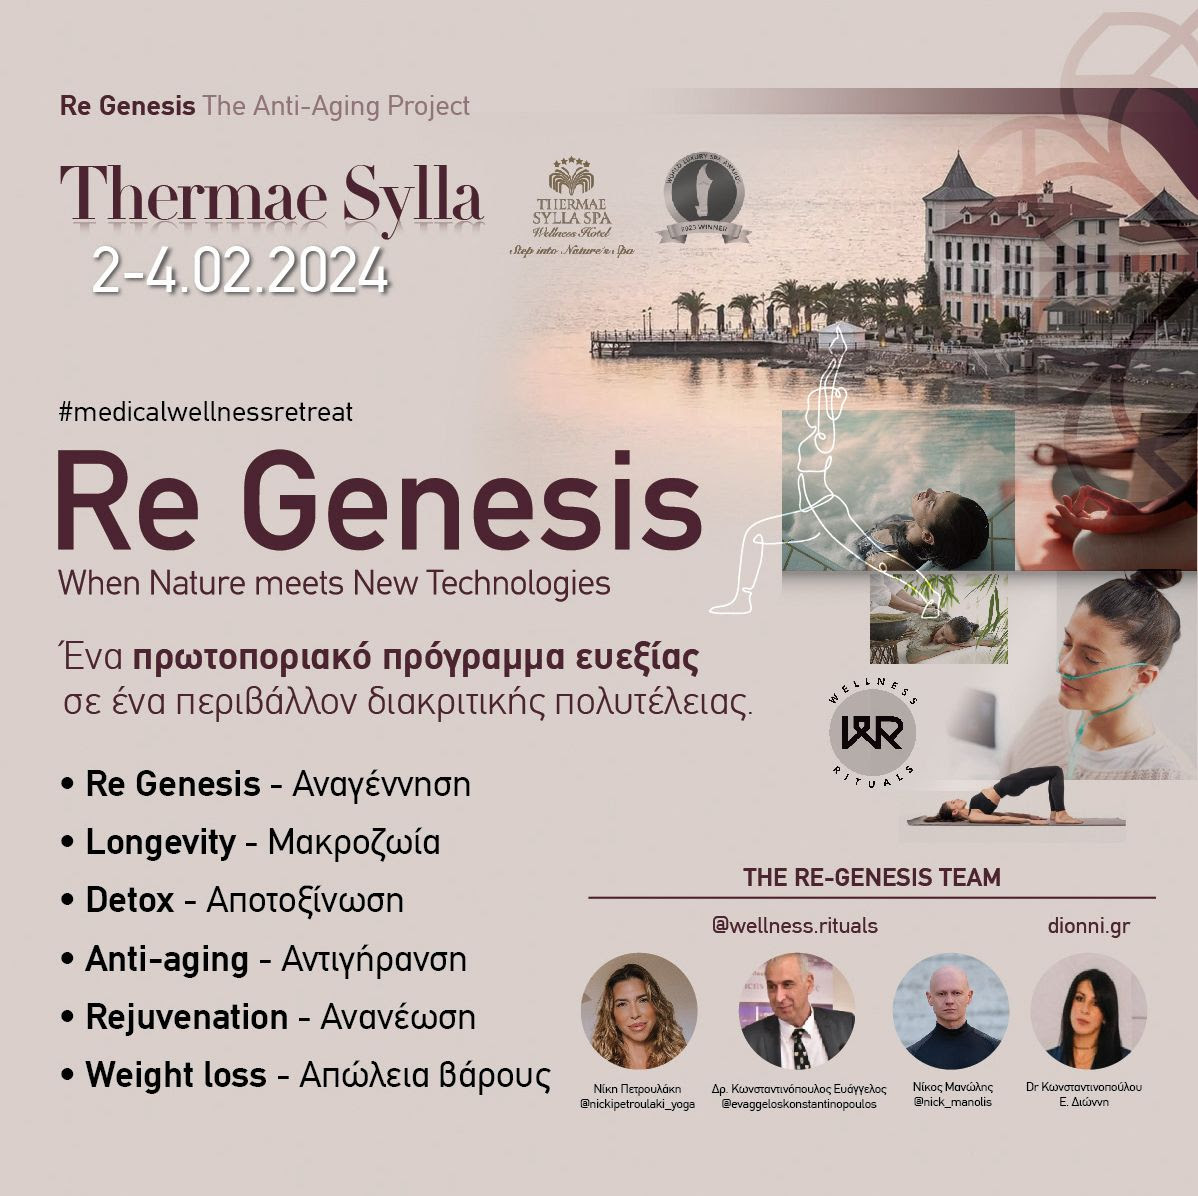 Re Genesis The Anti-Aging Project